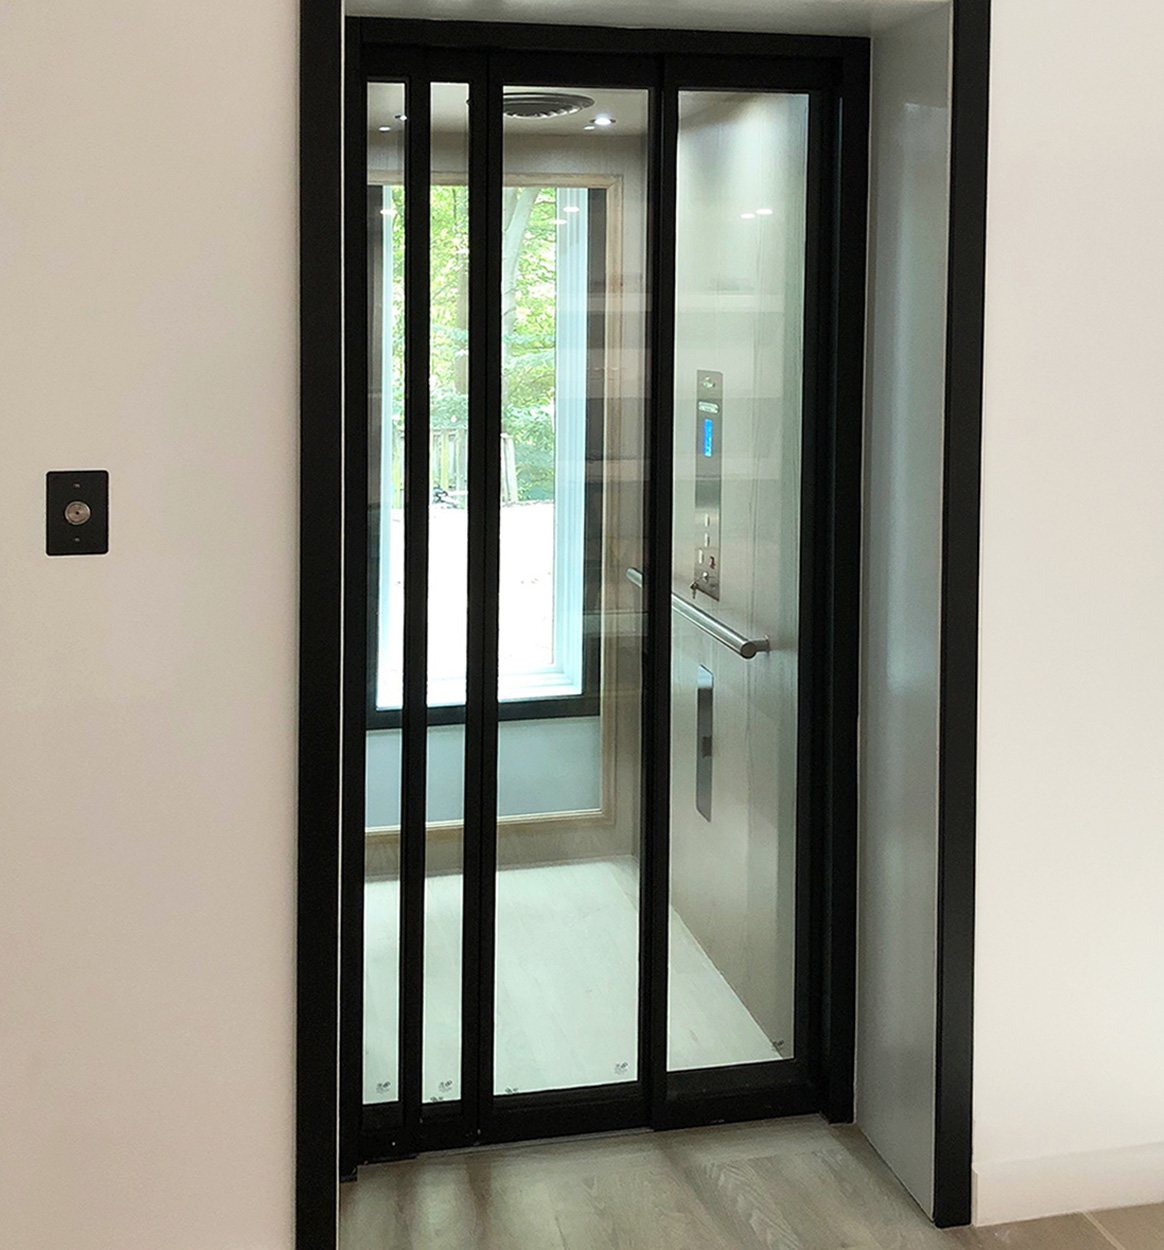 Home elevator features, automatic glass sliding doors